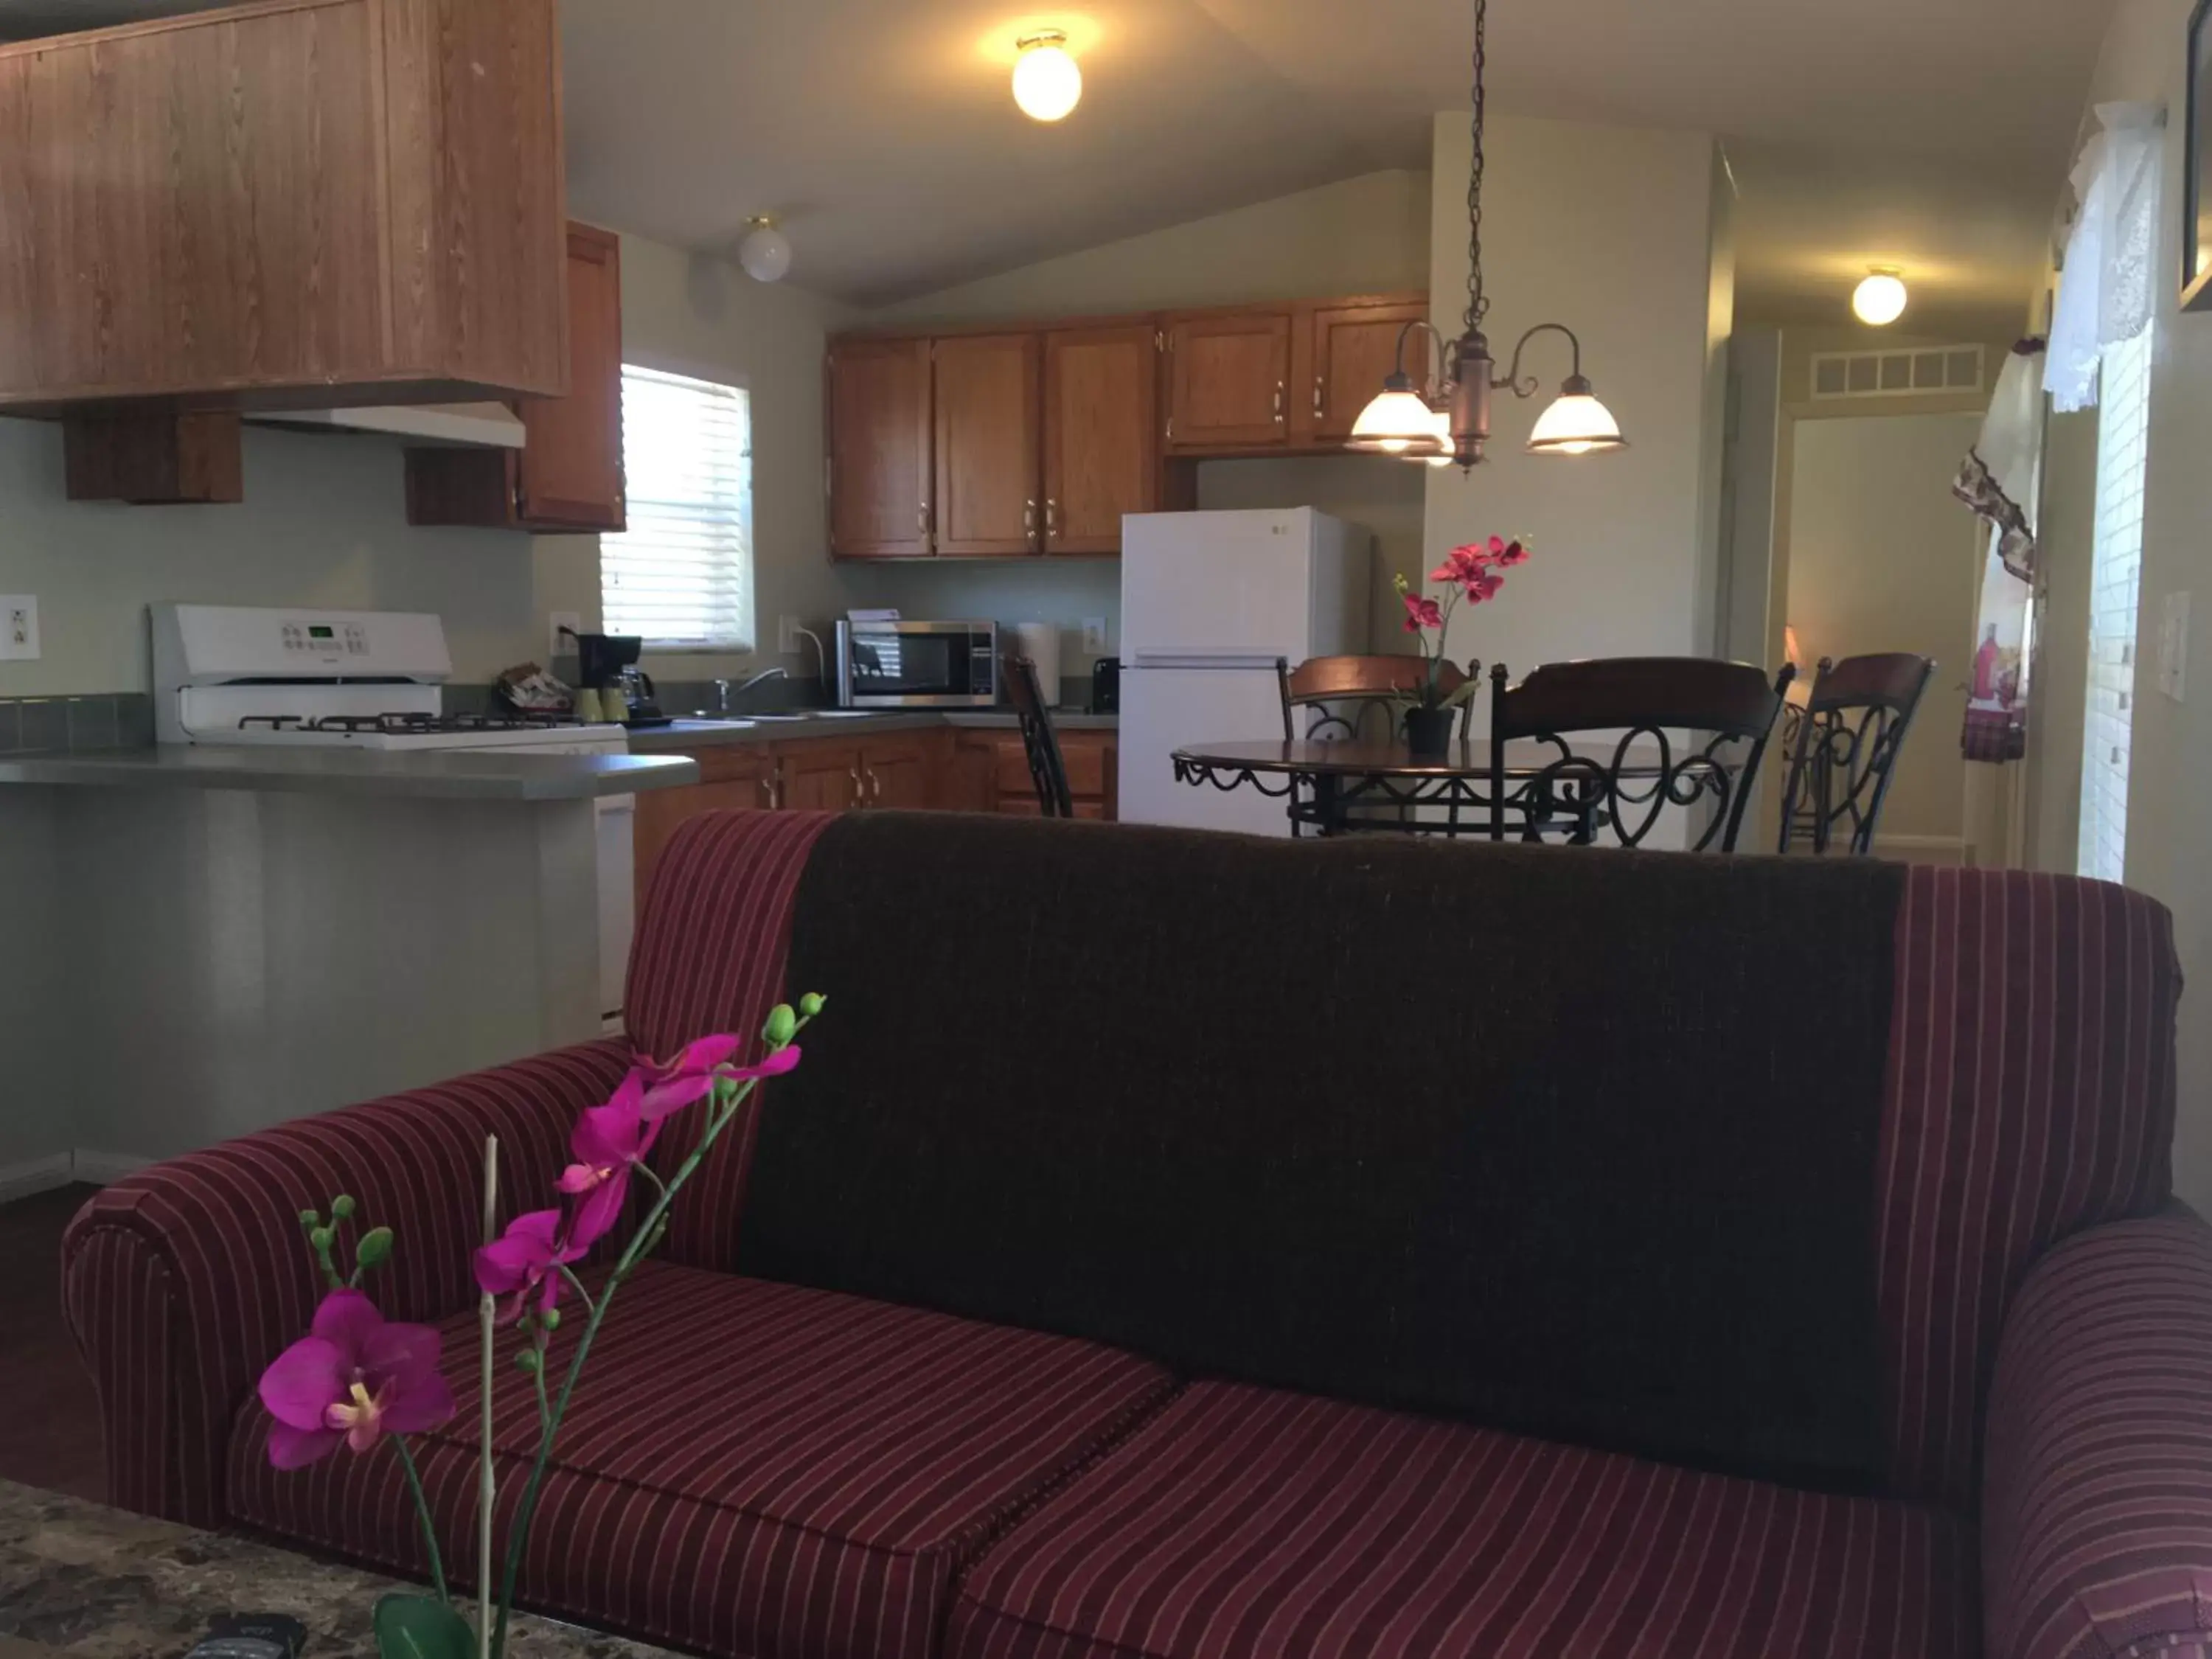 Deluxe Family Room in Olancha RV Park and Motel